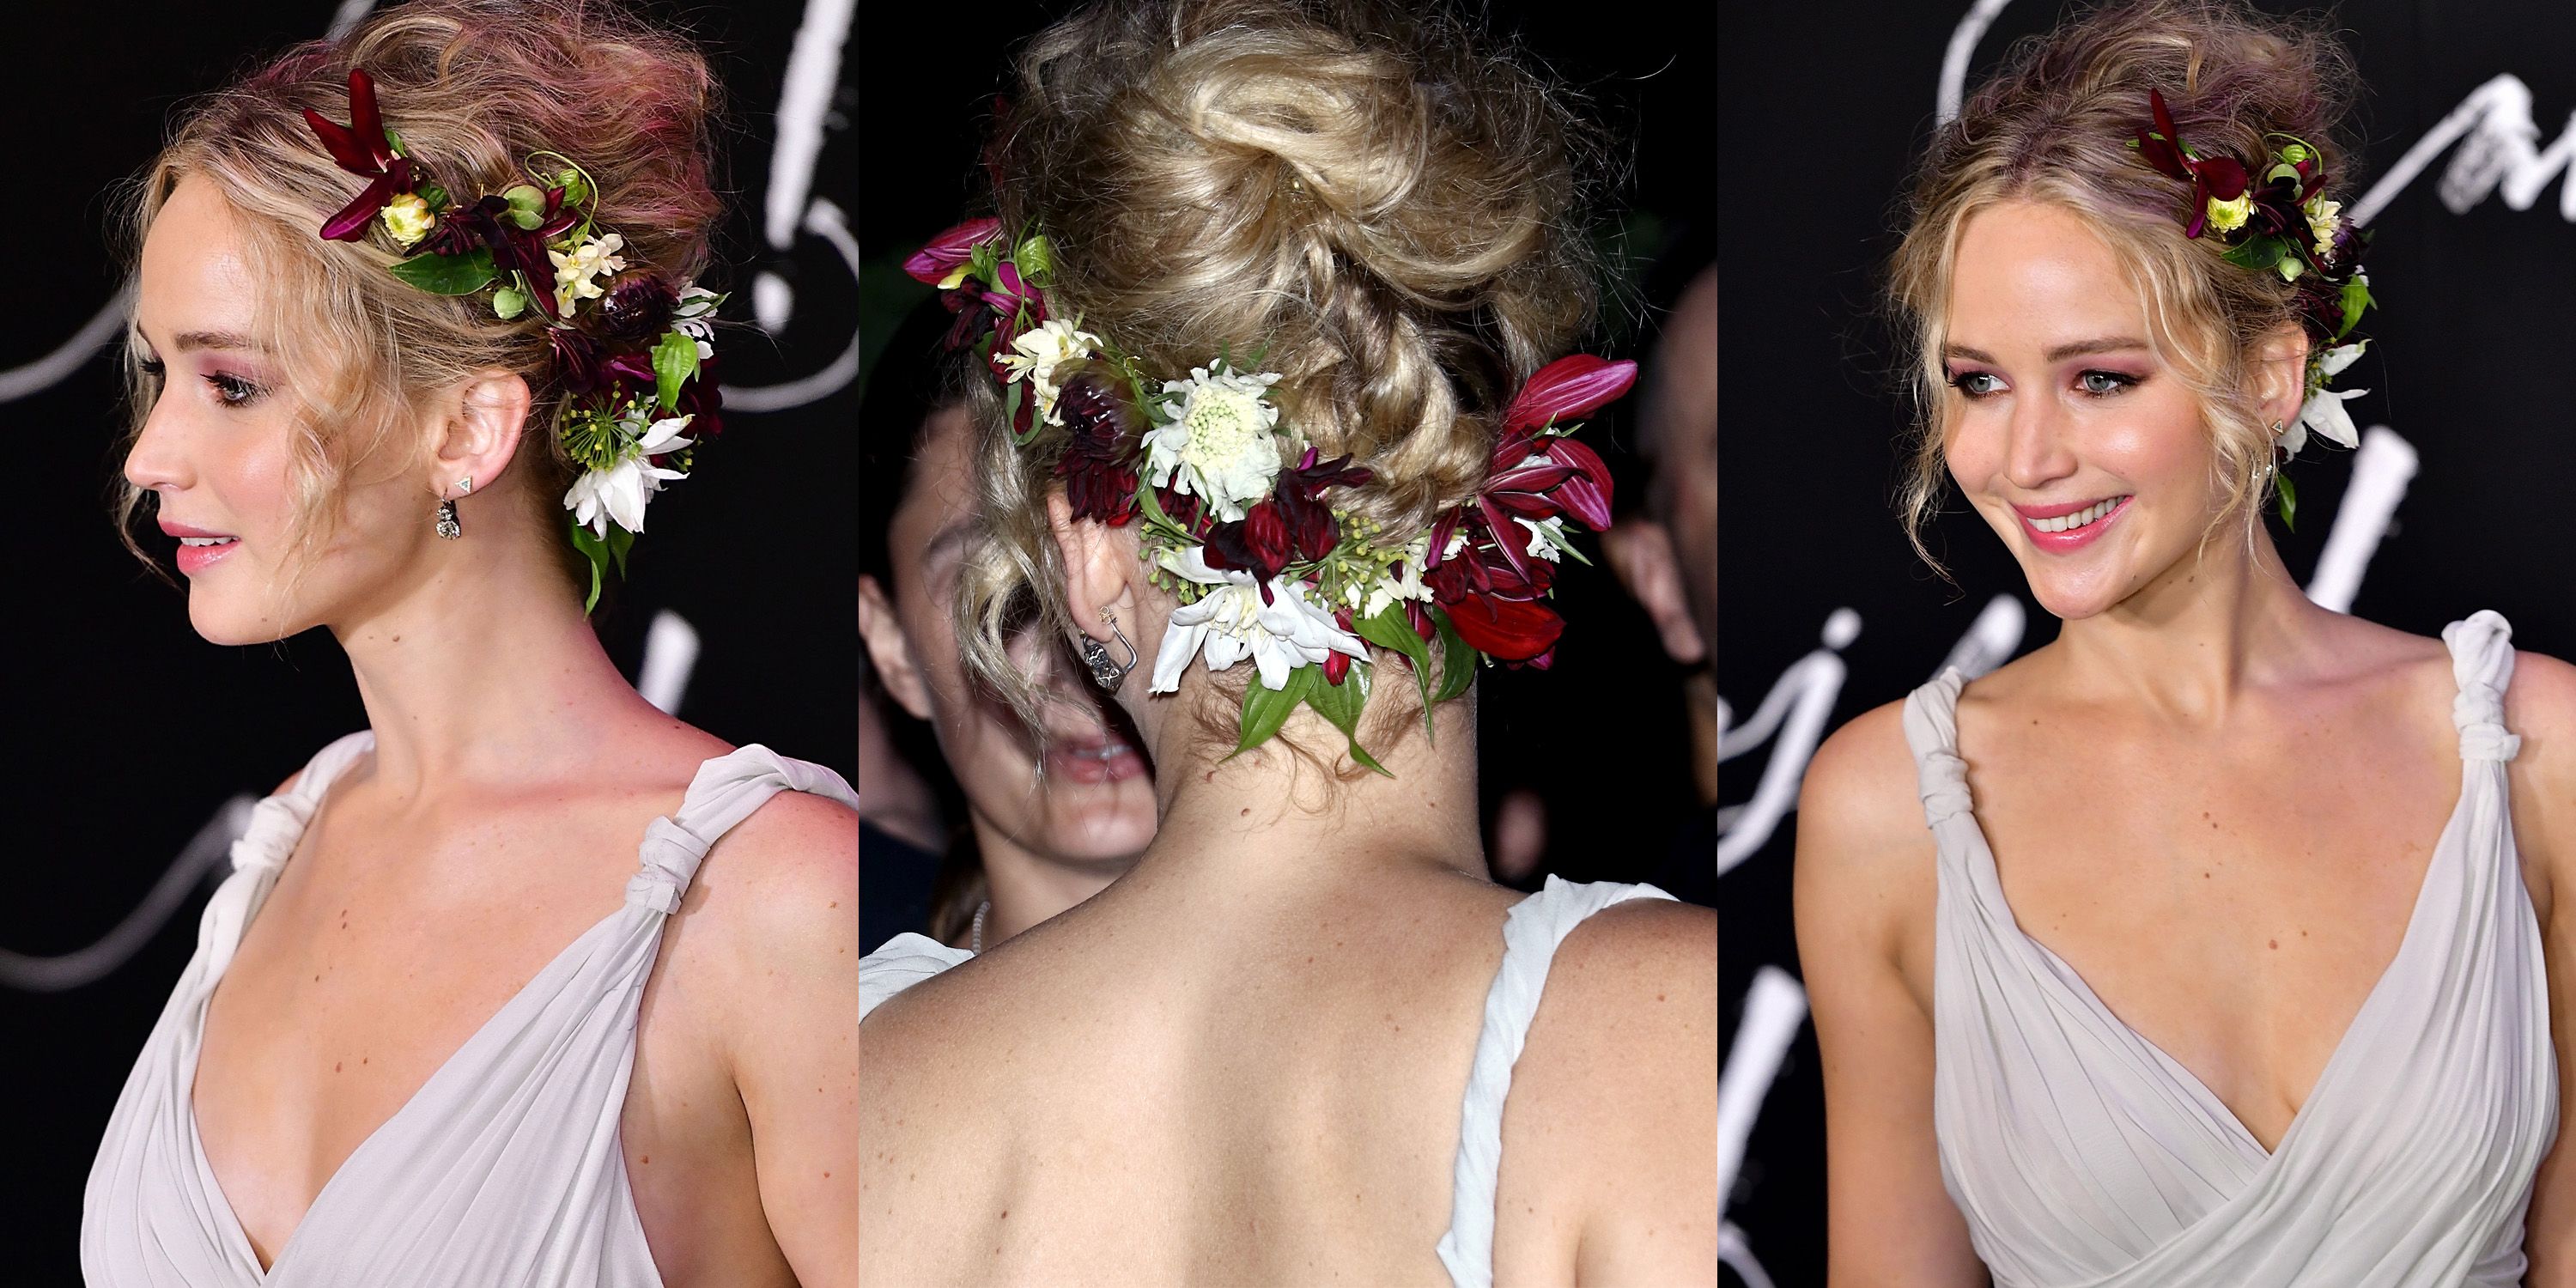 Wedding hairstyles with flowers 6 of our favourite options  Lavender   Rose